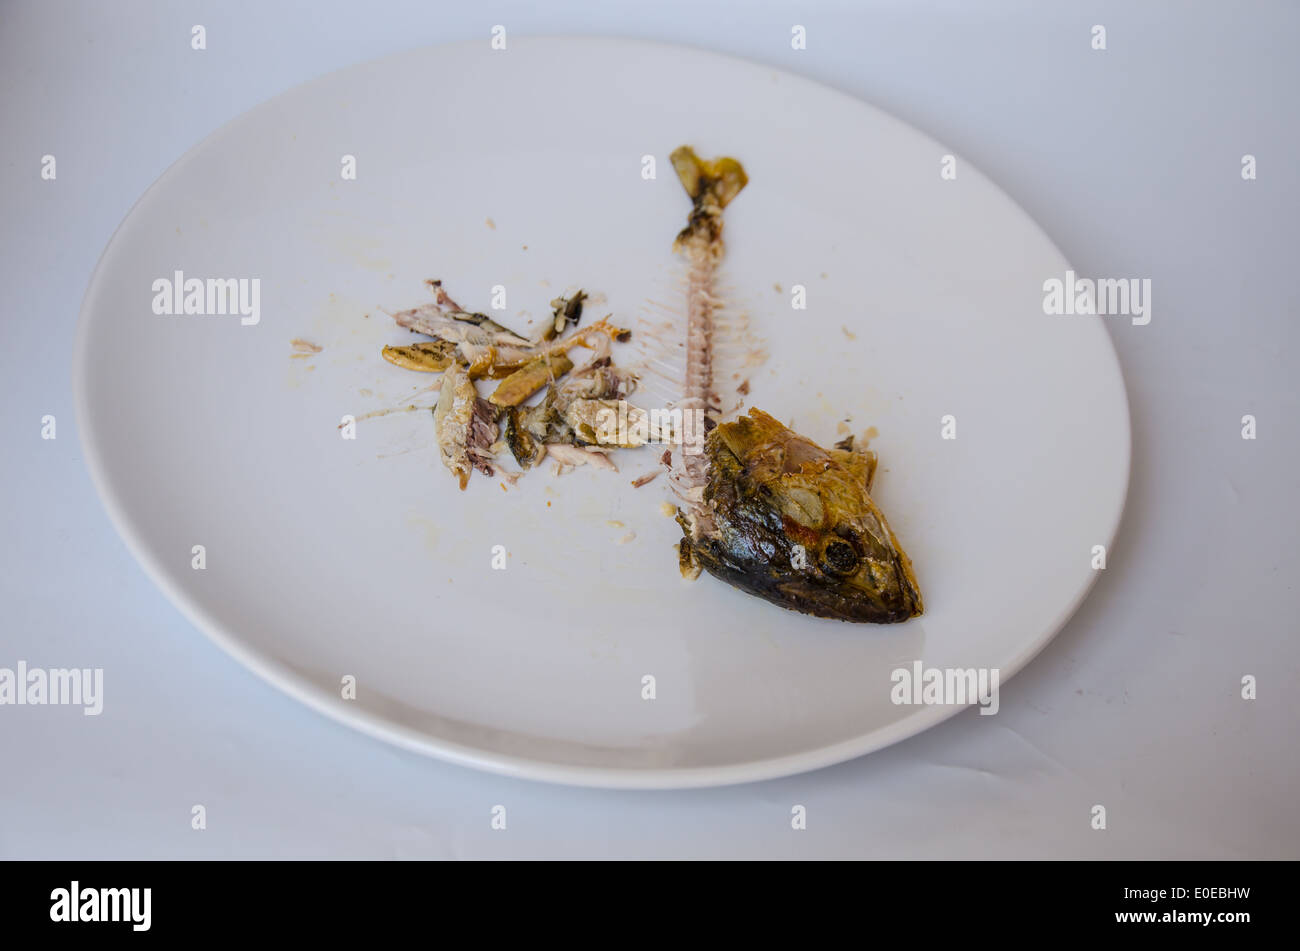 fish bone on dish from eating over Stock Photo